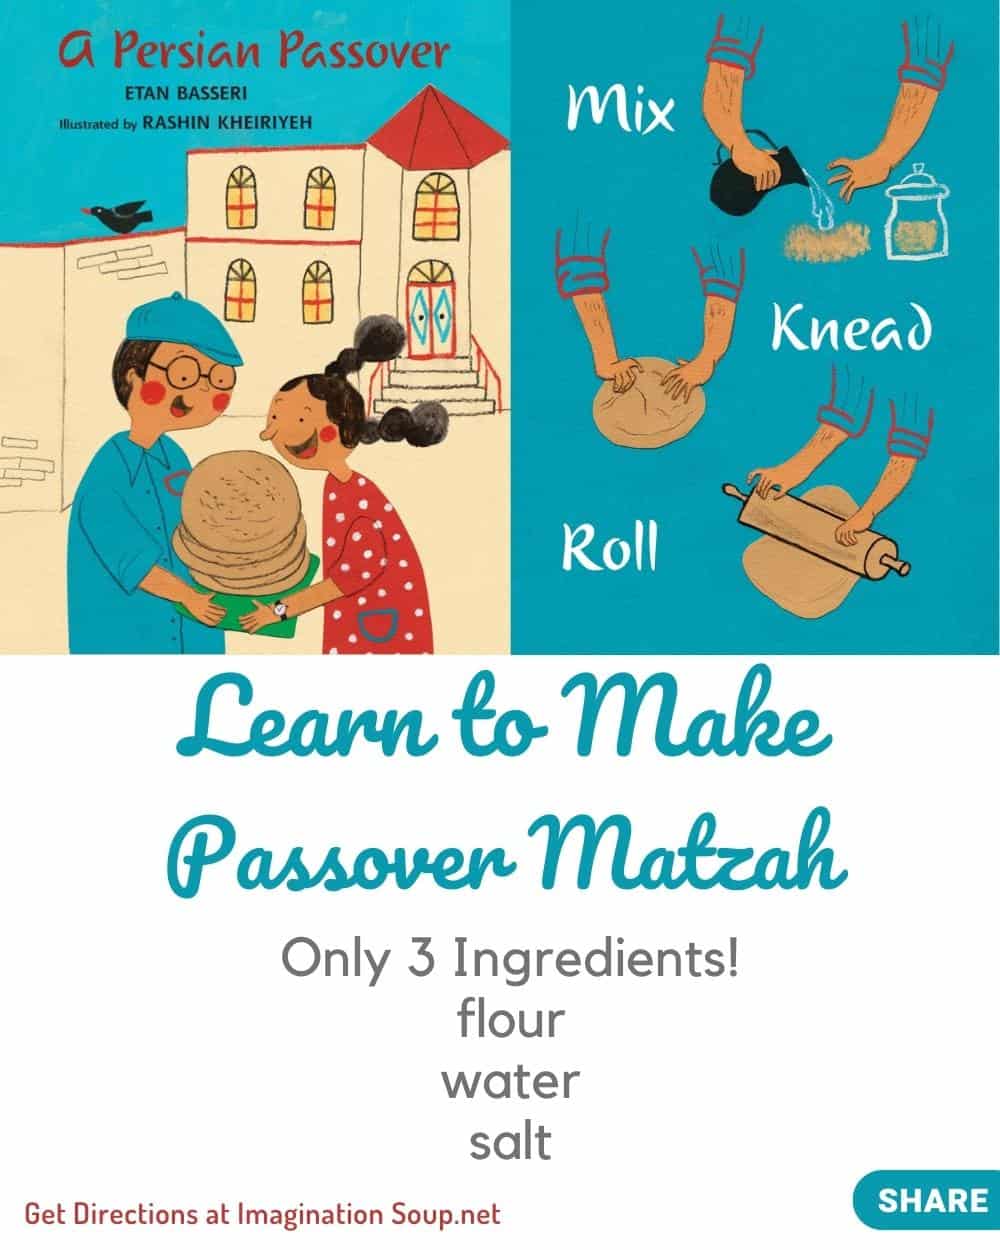 How to Make Passover Unleavened Bread (from Persian Passover)